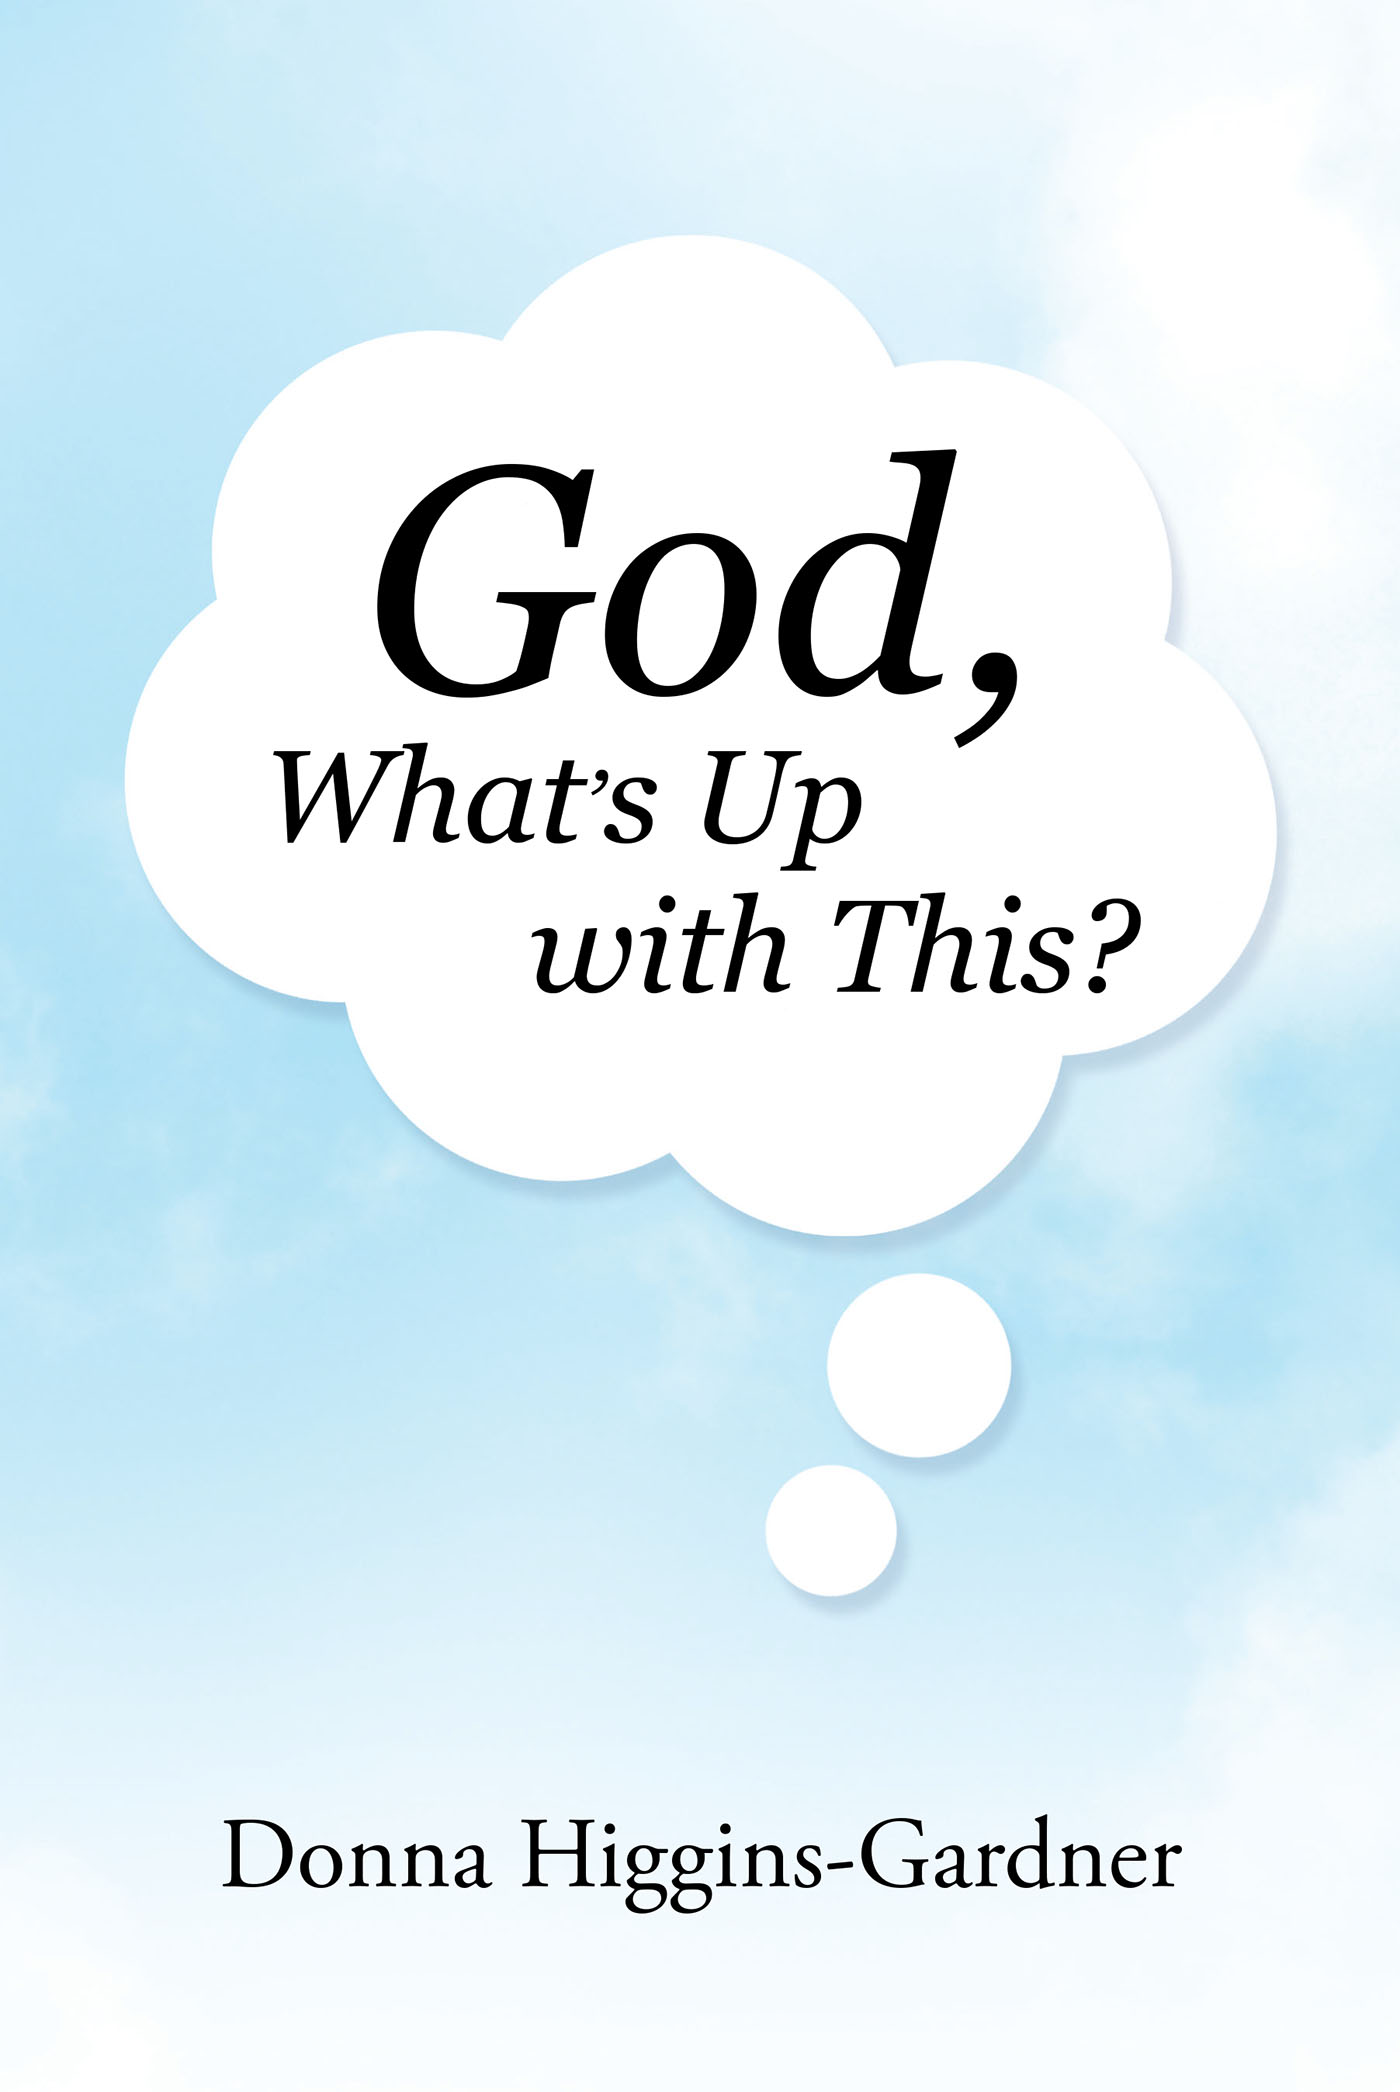 Author Donna Higgins-Gardner’s New Book, "God, What’s Up with This?" Shares How the Author’s Love of God Has Carried Her Through the Last Twenty-Three Years